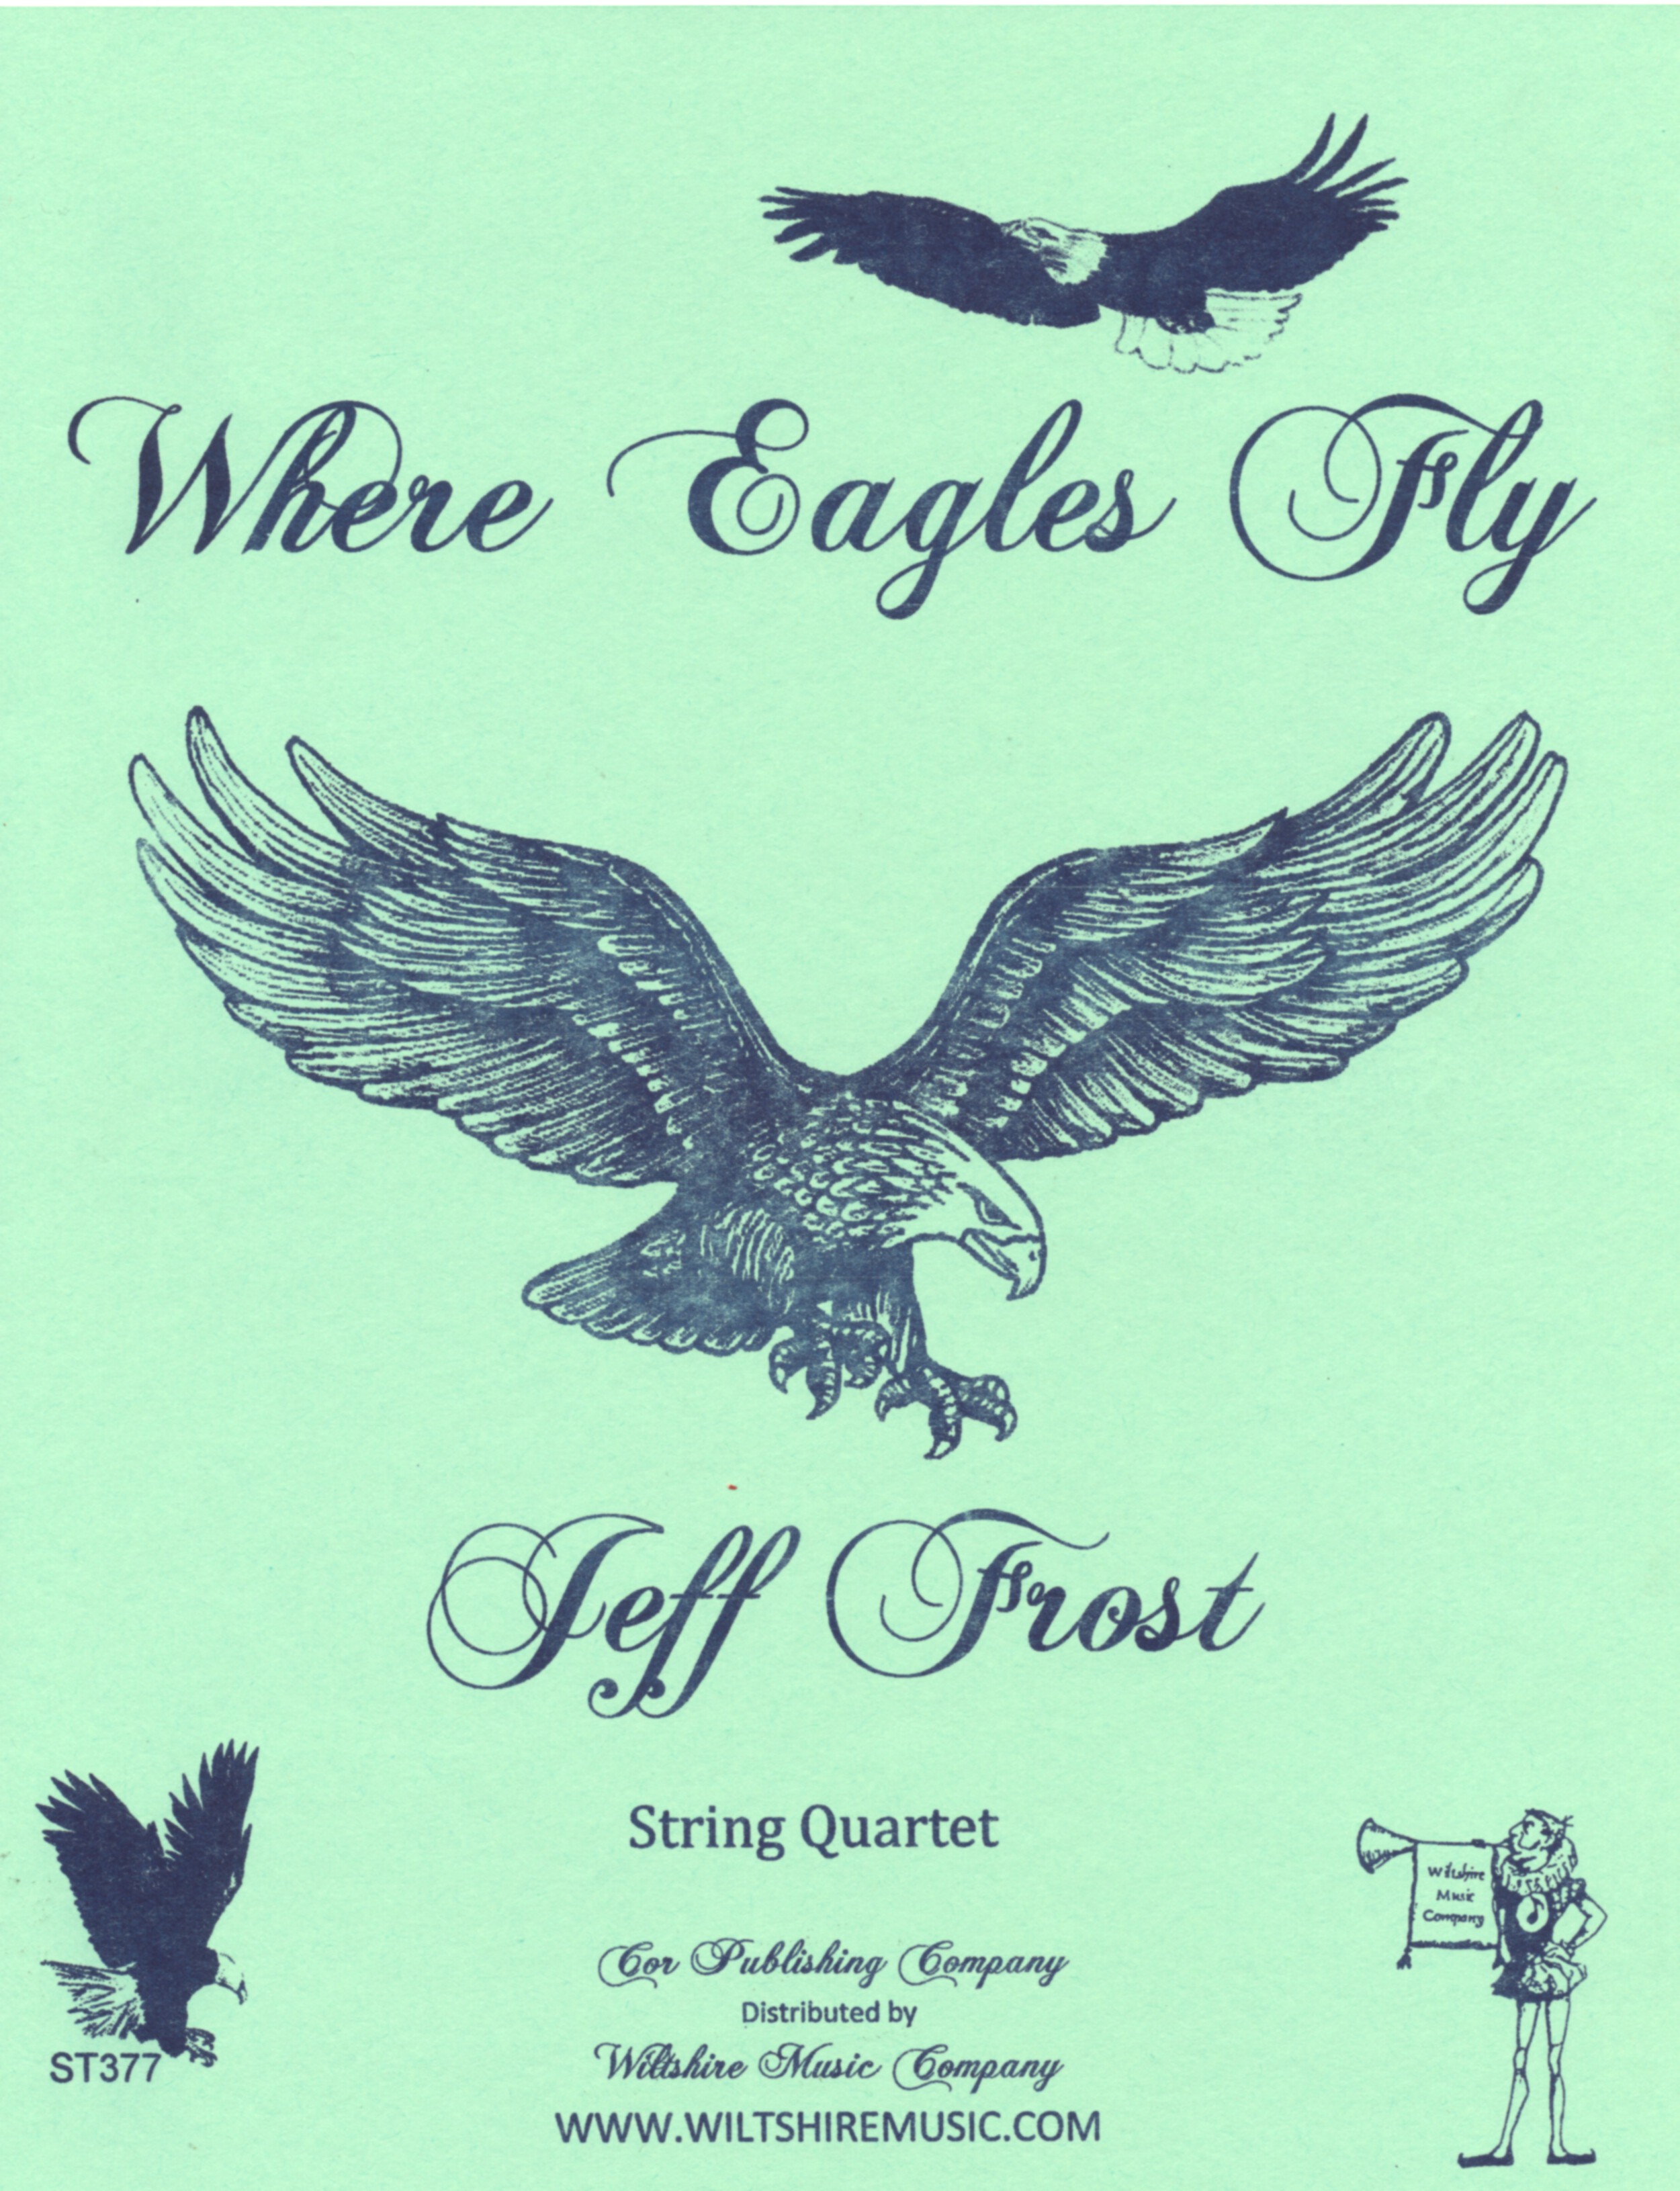 Where Eagles Fly, Jeff Frost